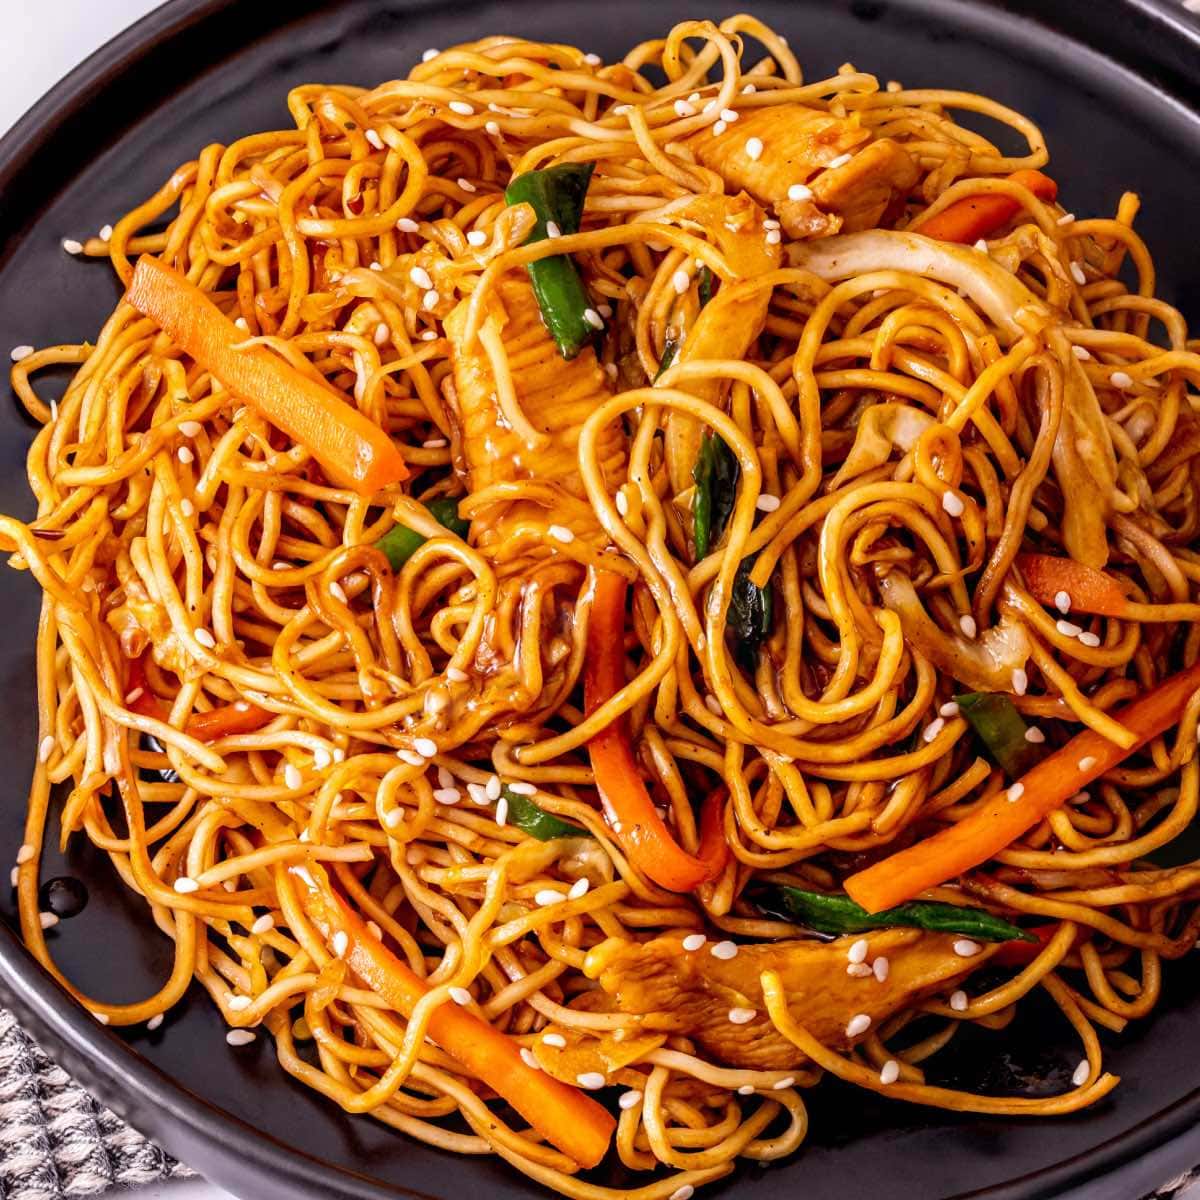 Chicken Noodles Recipe ❤️  Special Tips To Make Chicken Chow Mein Recipe❤️  